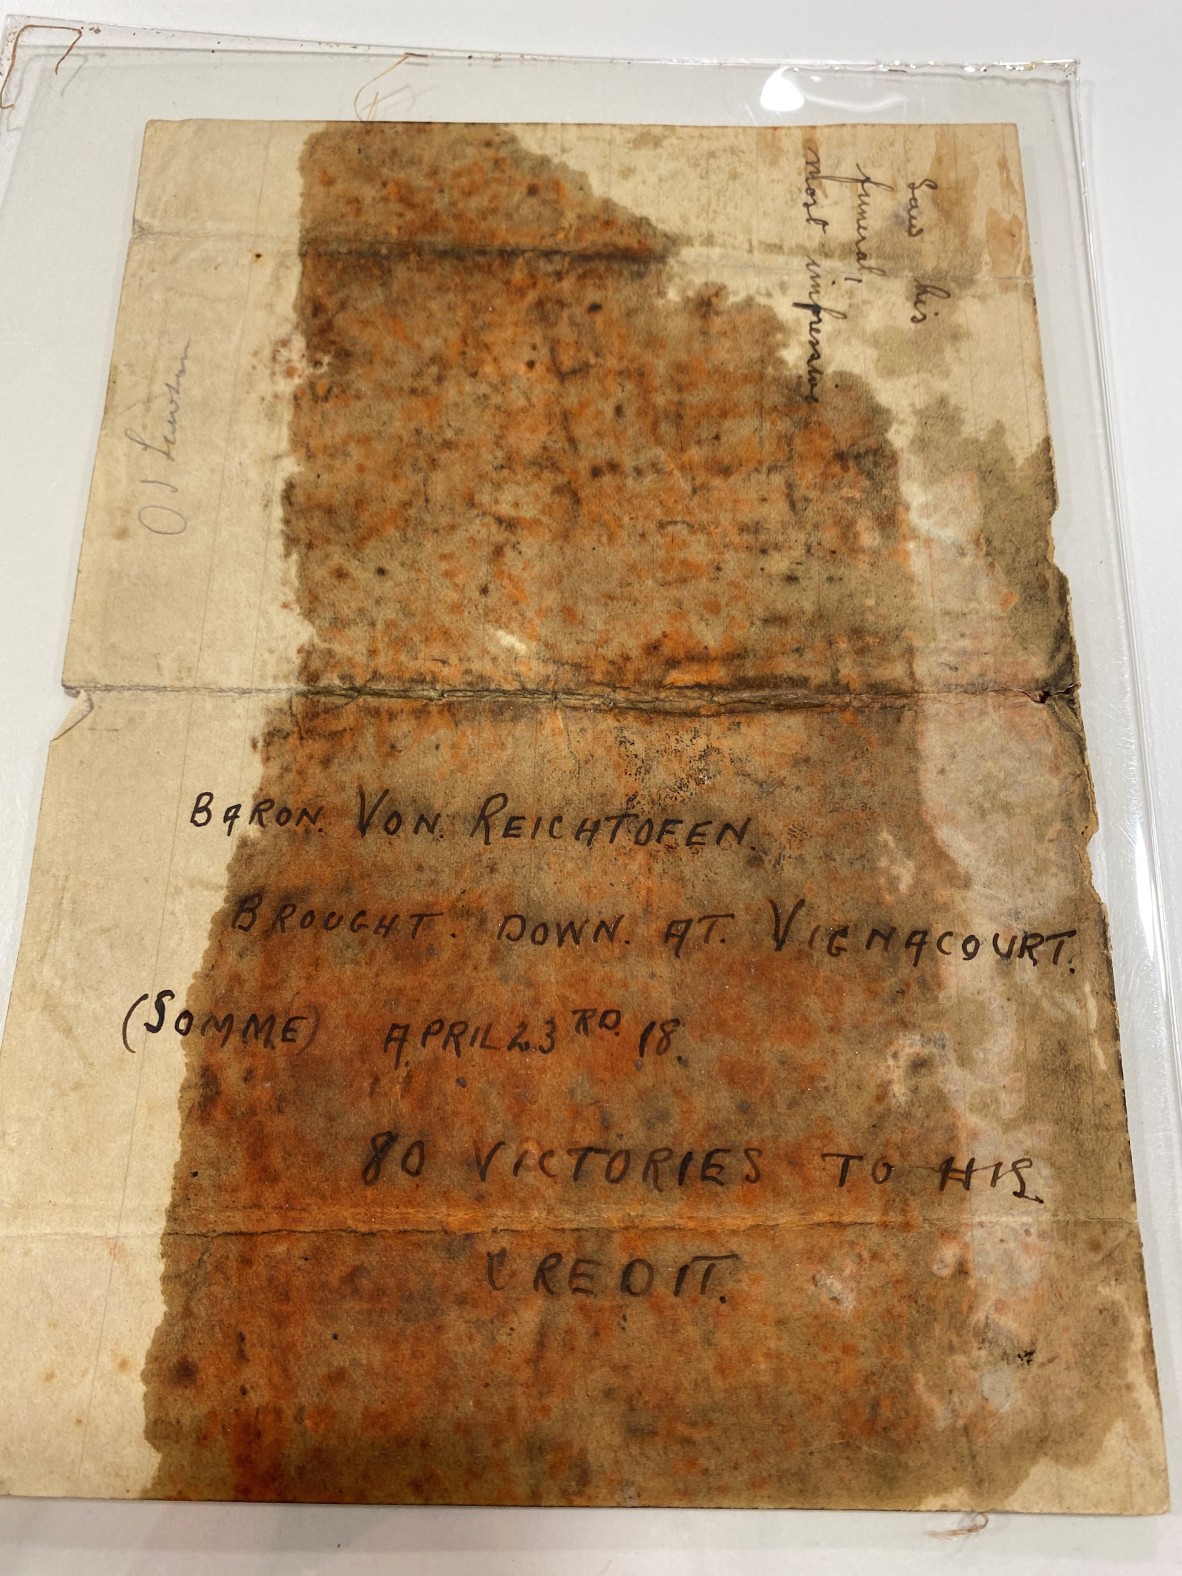 a very old and red-stained note houses a piece of WW1 Aeroplane It reads Baron Von Reichtofen Sic Brought down at Vignacourt Somme April 23rd 18